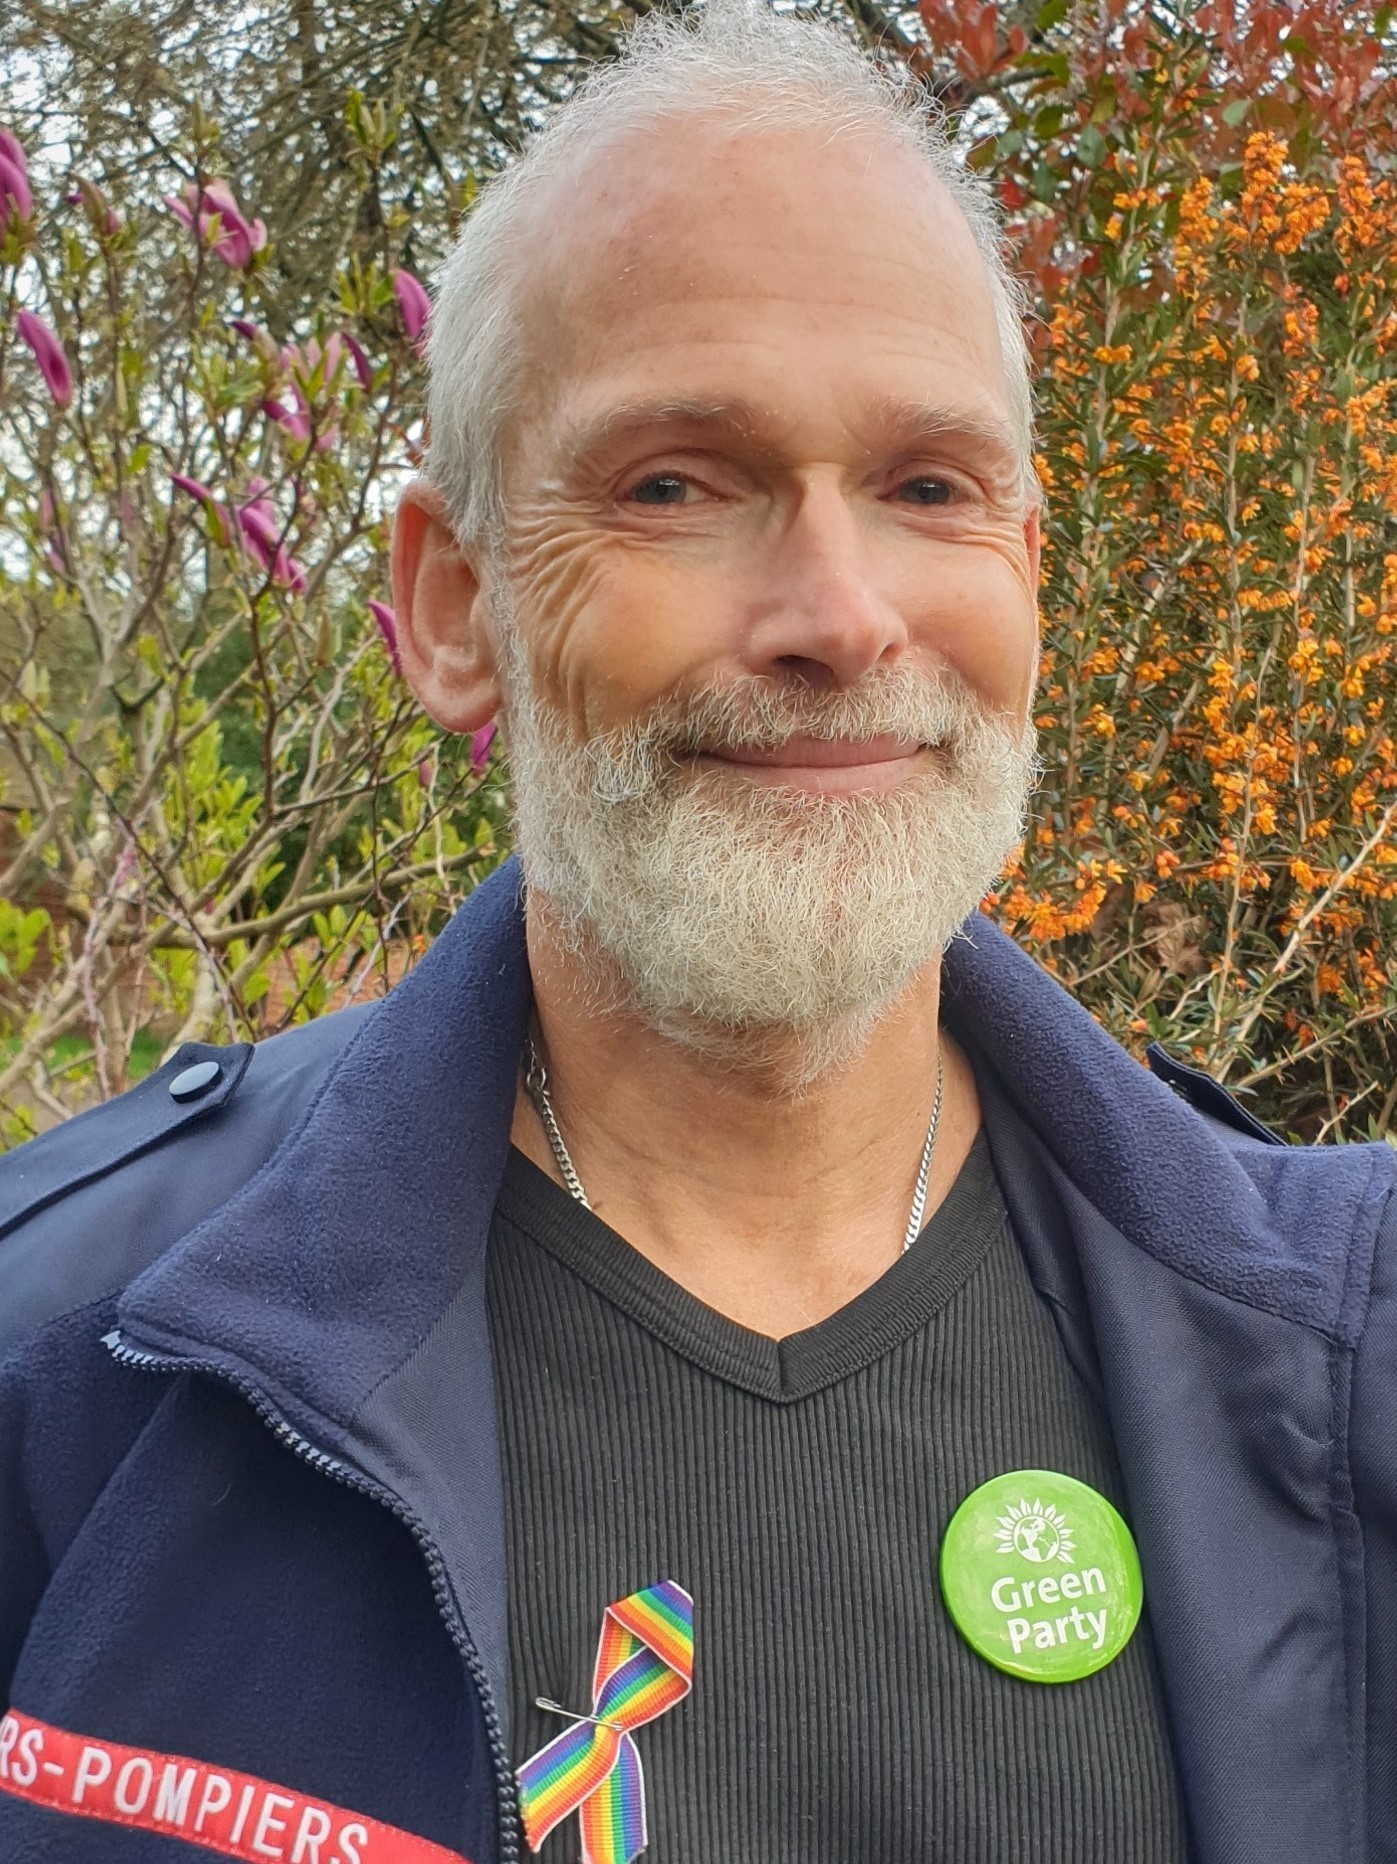 Stuart Jackson, Green Party candidate for police and crime commissioner for Devon, Cornwall and the Isles of Scilly (Image: Stuart Jackson - free for use by LDRS partners)